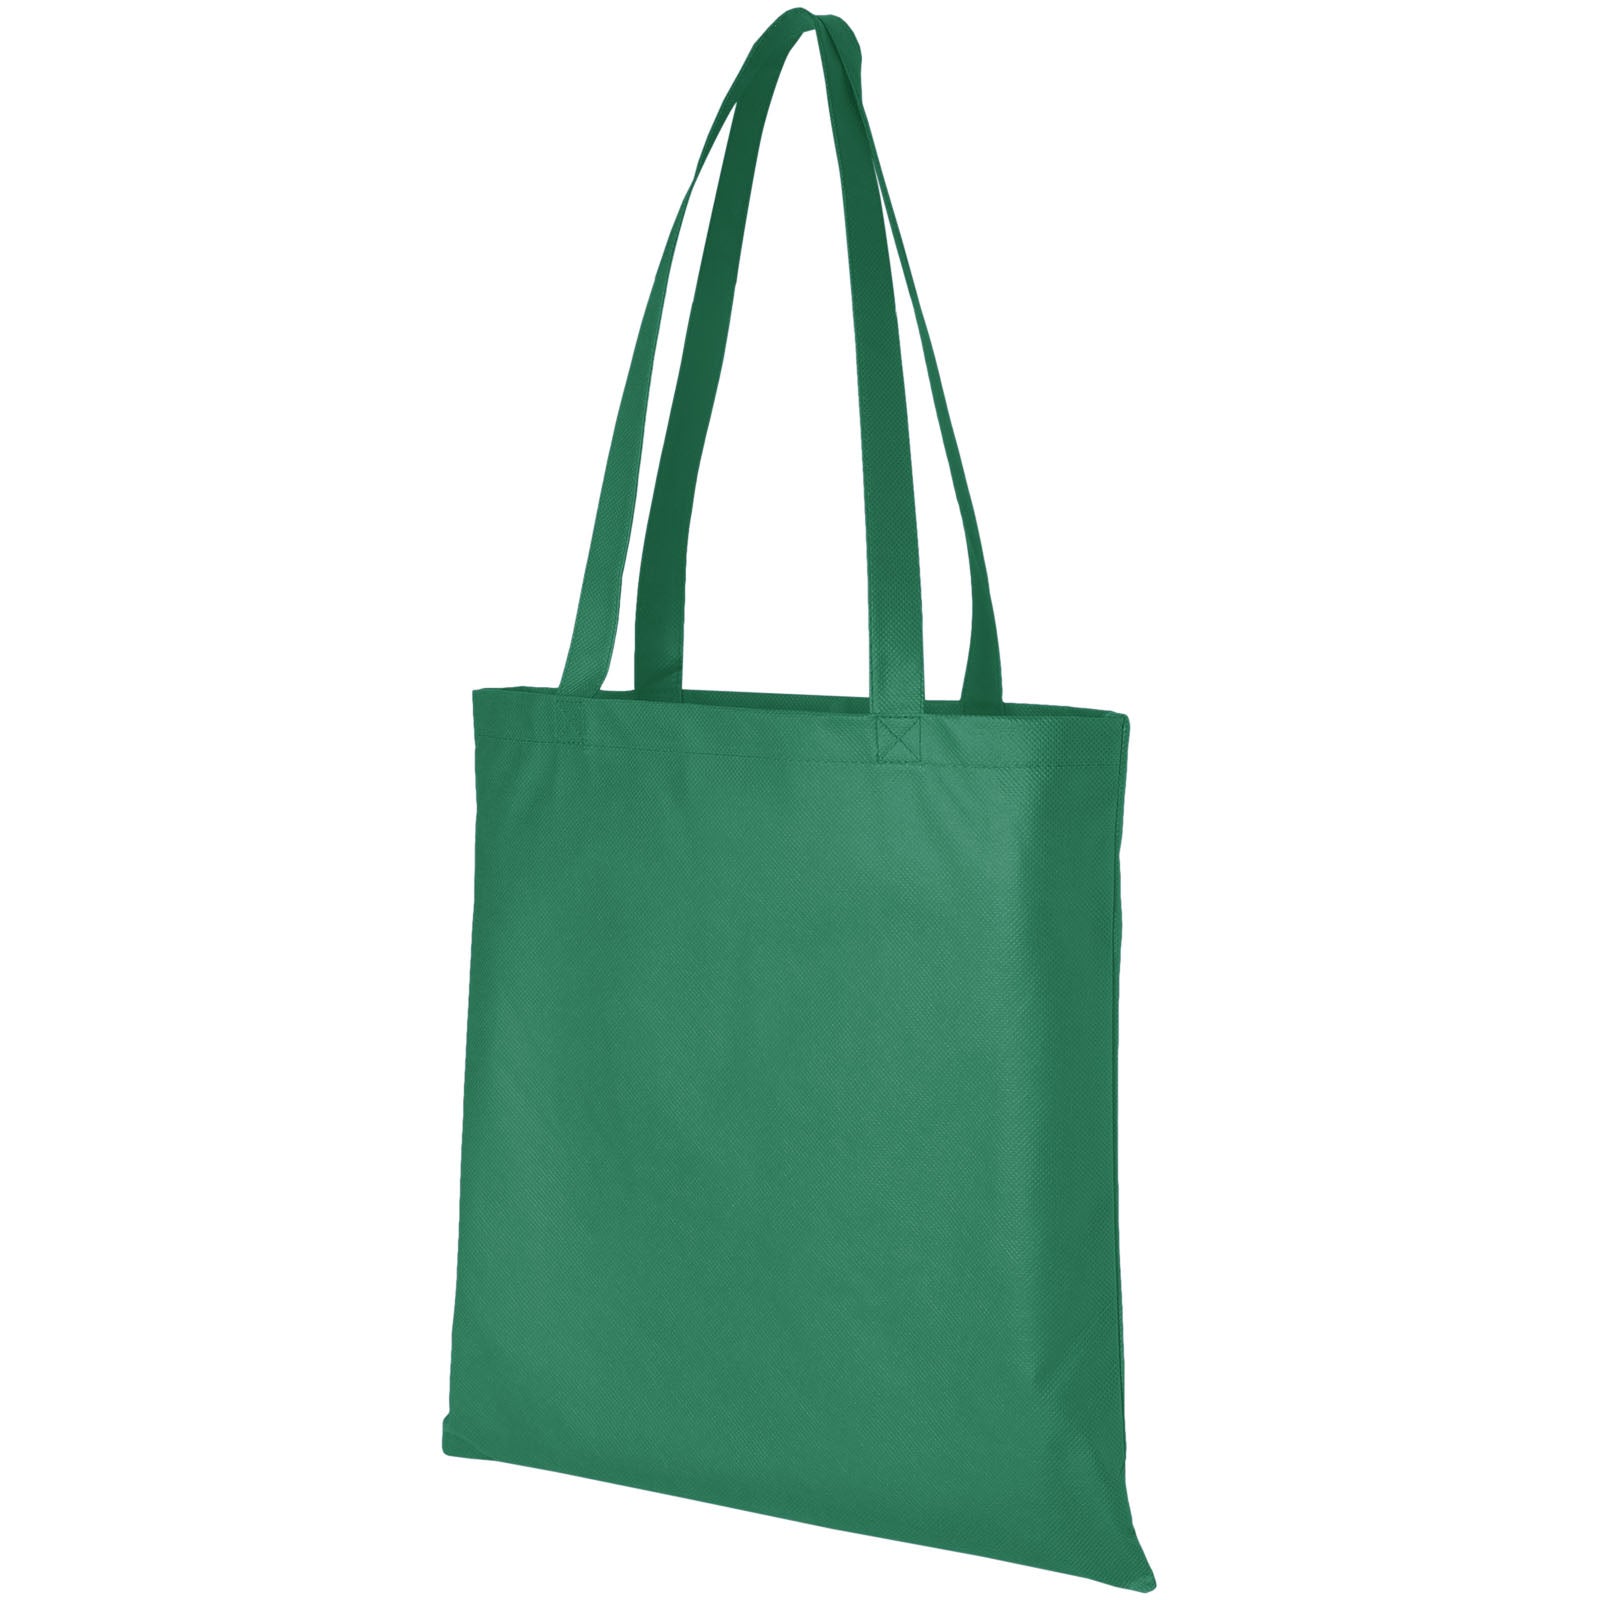 Zeus large non-woven convention tote bag 6L – Totally Branded